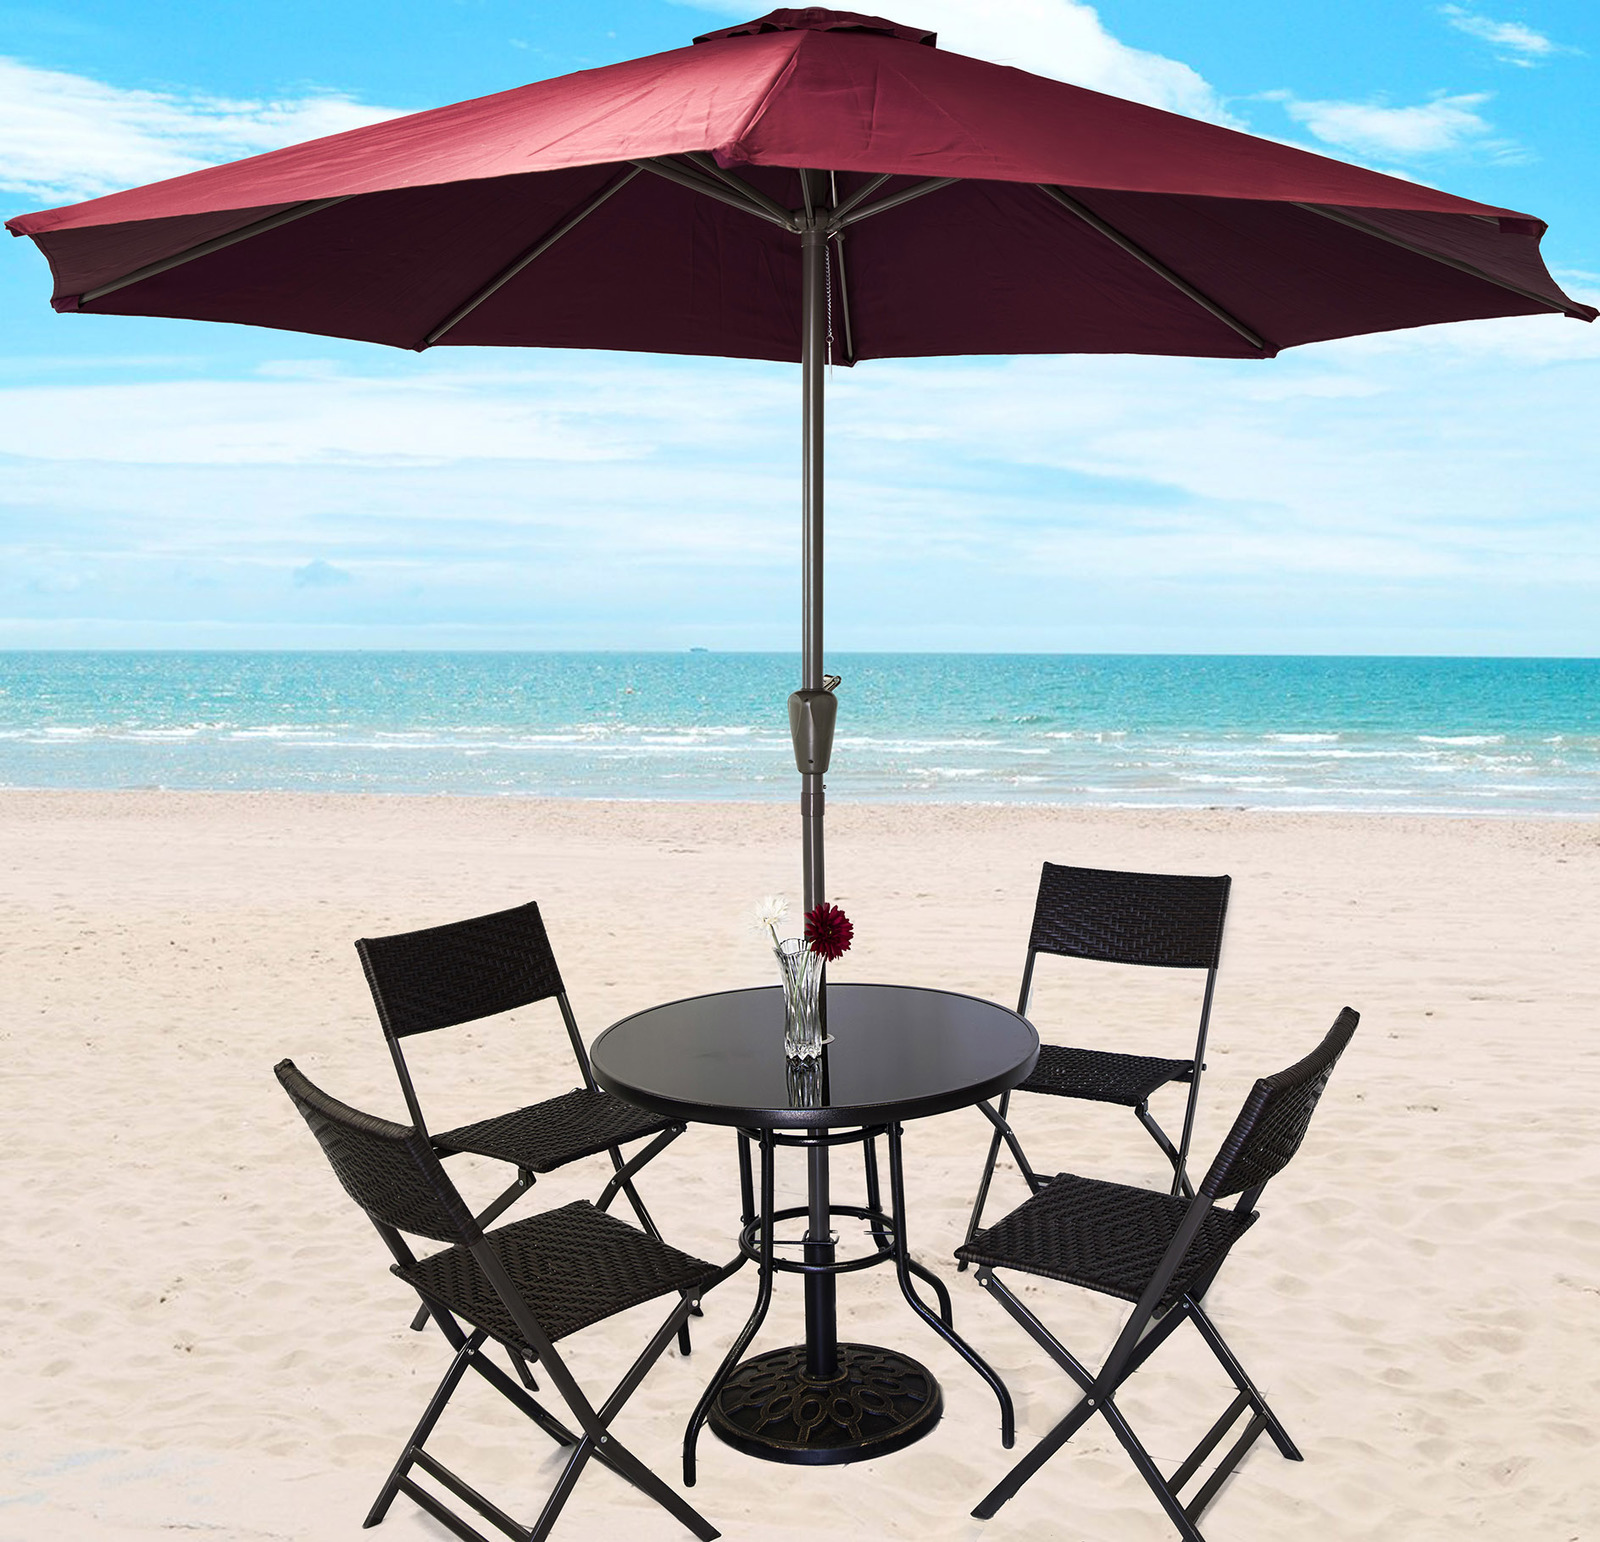 Alfresco 7 Piece Outdoor Setting (Maroon Umbrella & Stand, 4 Rattan Chairs, Round Table)